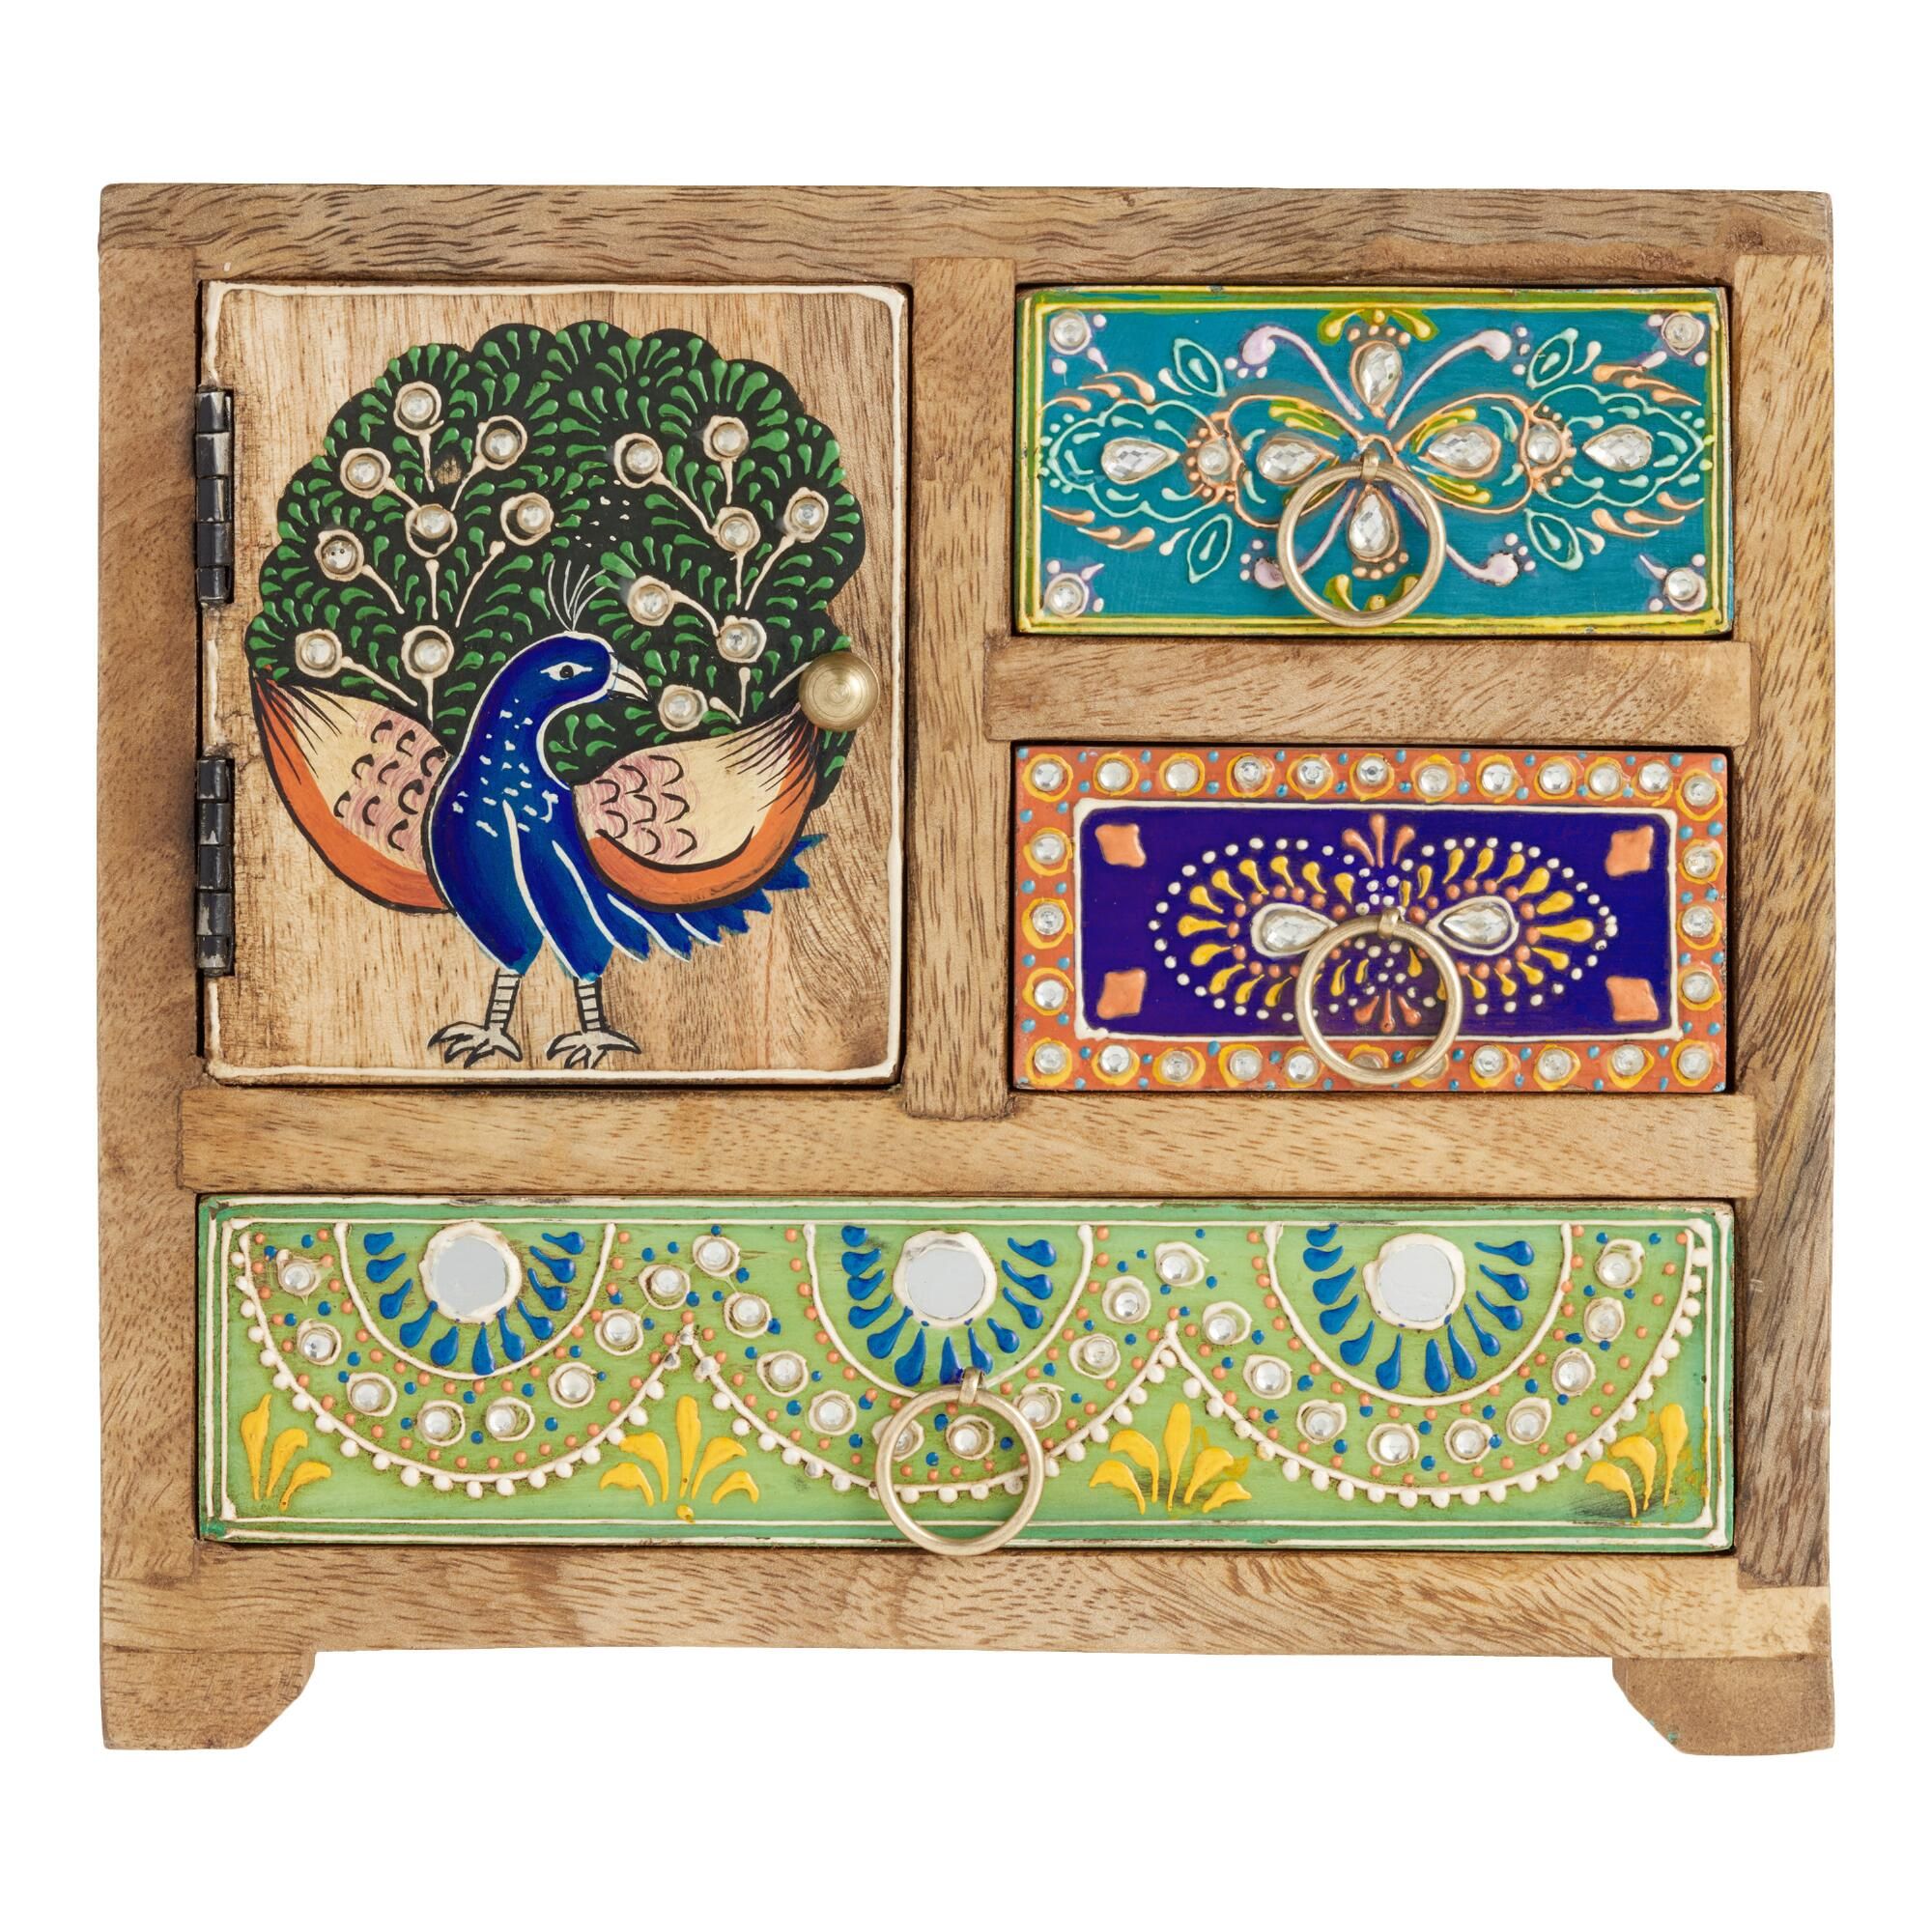 Creative Handicrafts 4 Drawer Hand Painted Rajasthani Style Embossed Wooden Box/Almirah